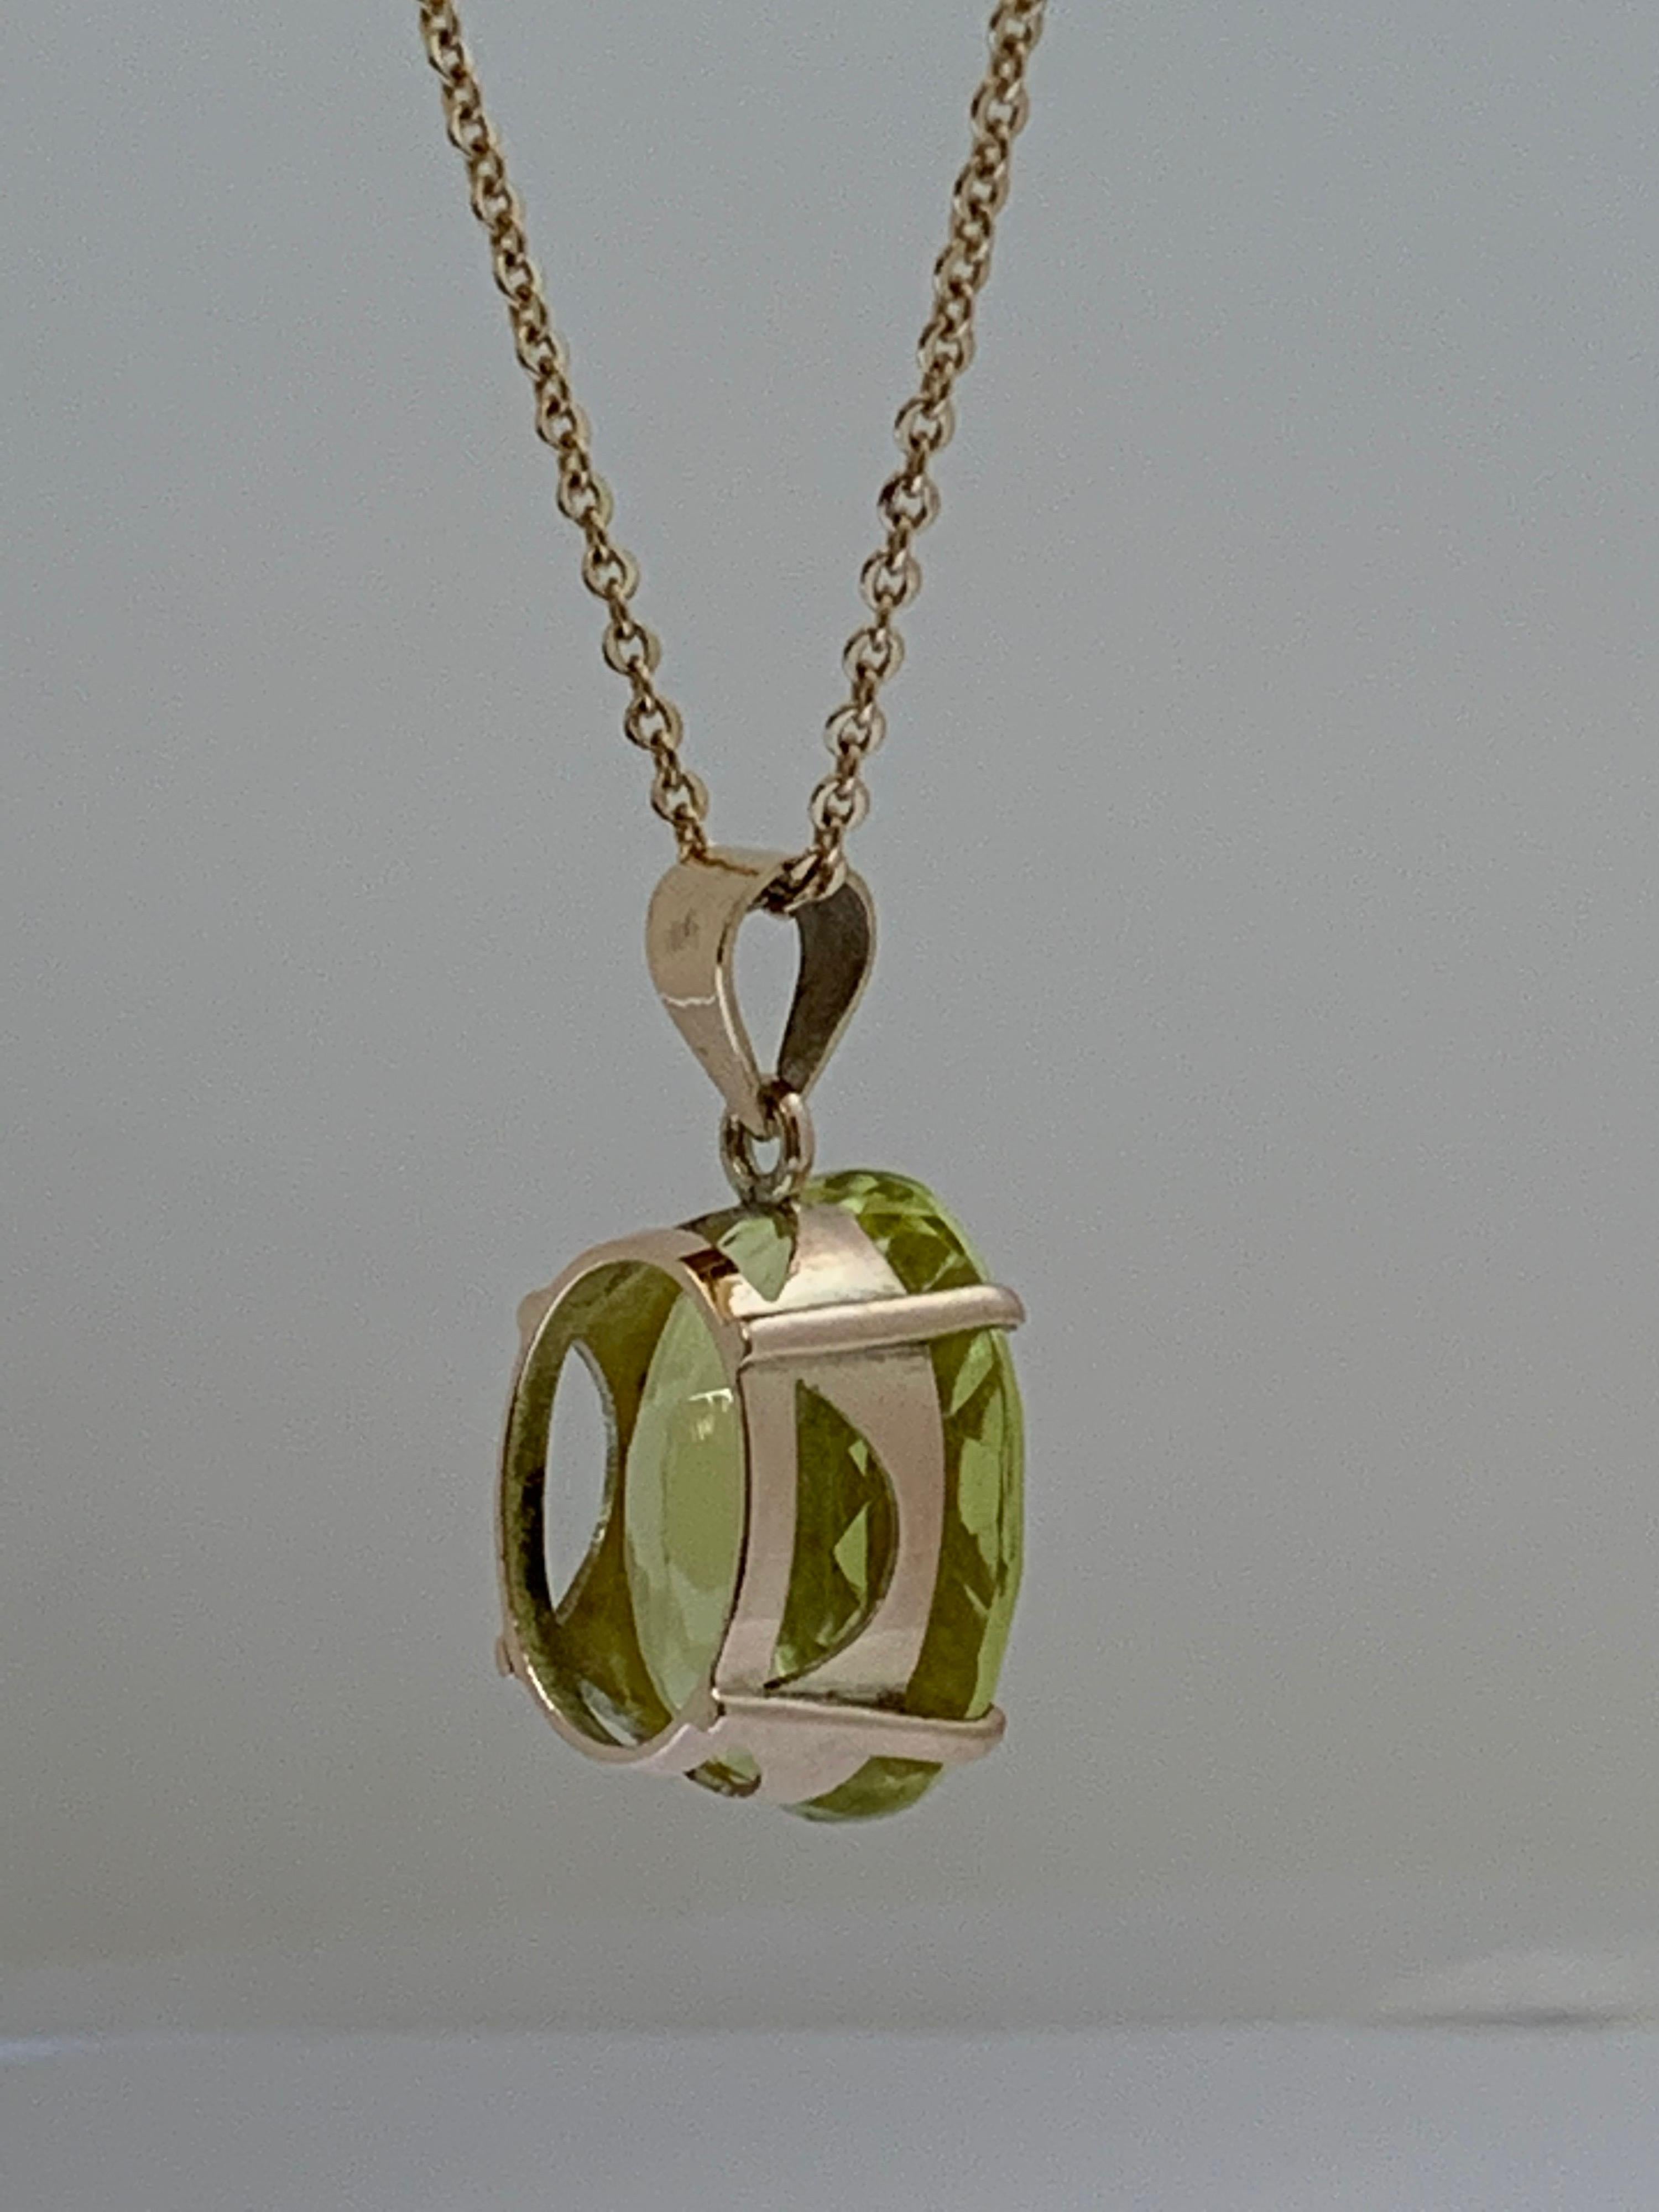 Natural Green Gold Lemon Quartz Measures 11 mm X 15 mm is hand cut and polished stone. The Lemon Quartz is set in 14 karat yellow Gold is 100% Handcrafted pendant.

The Chain in not included with this Pendant. 